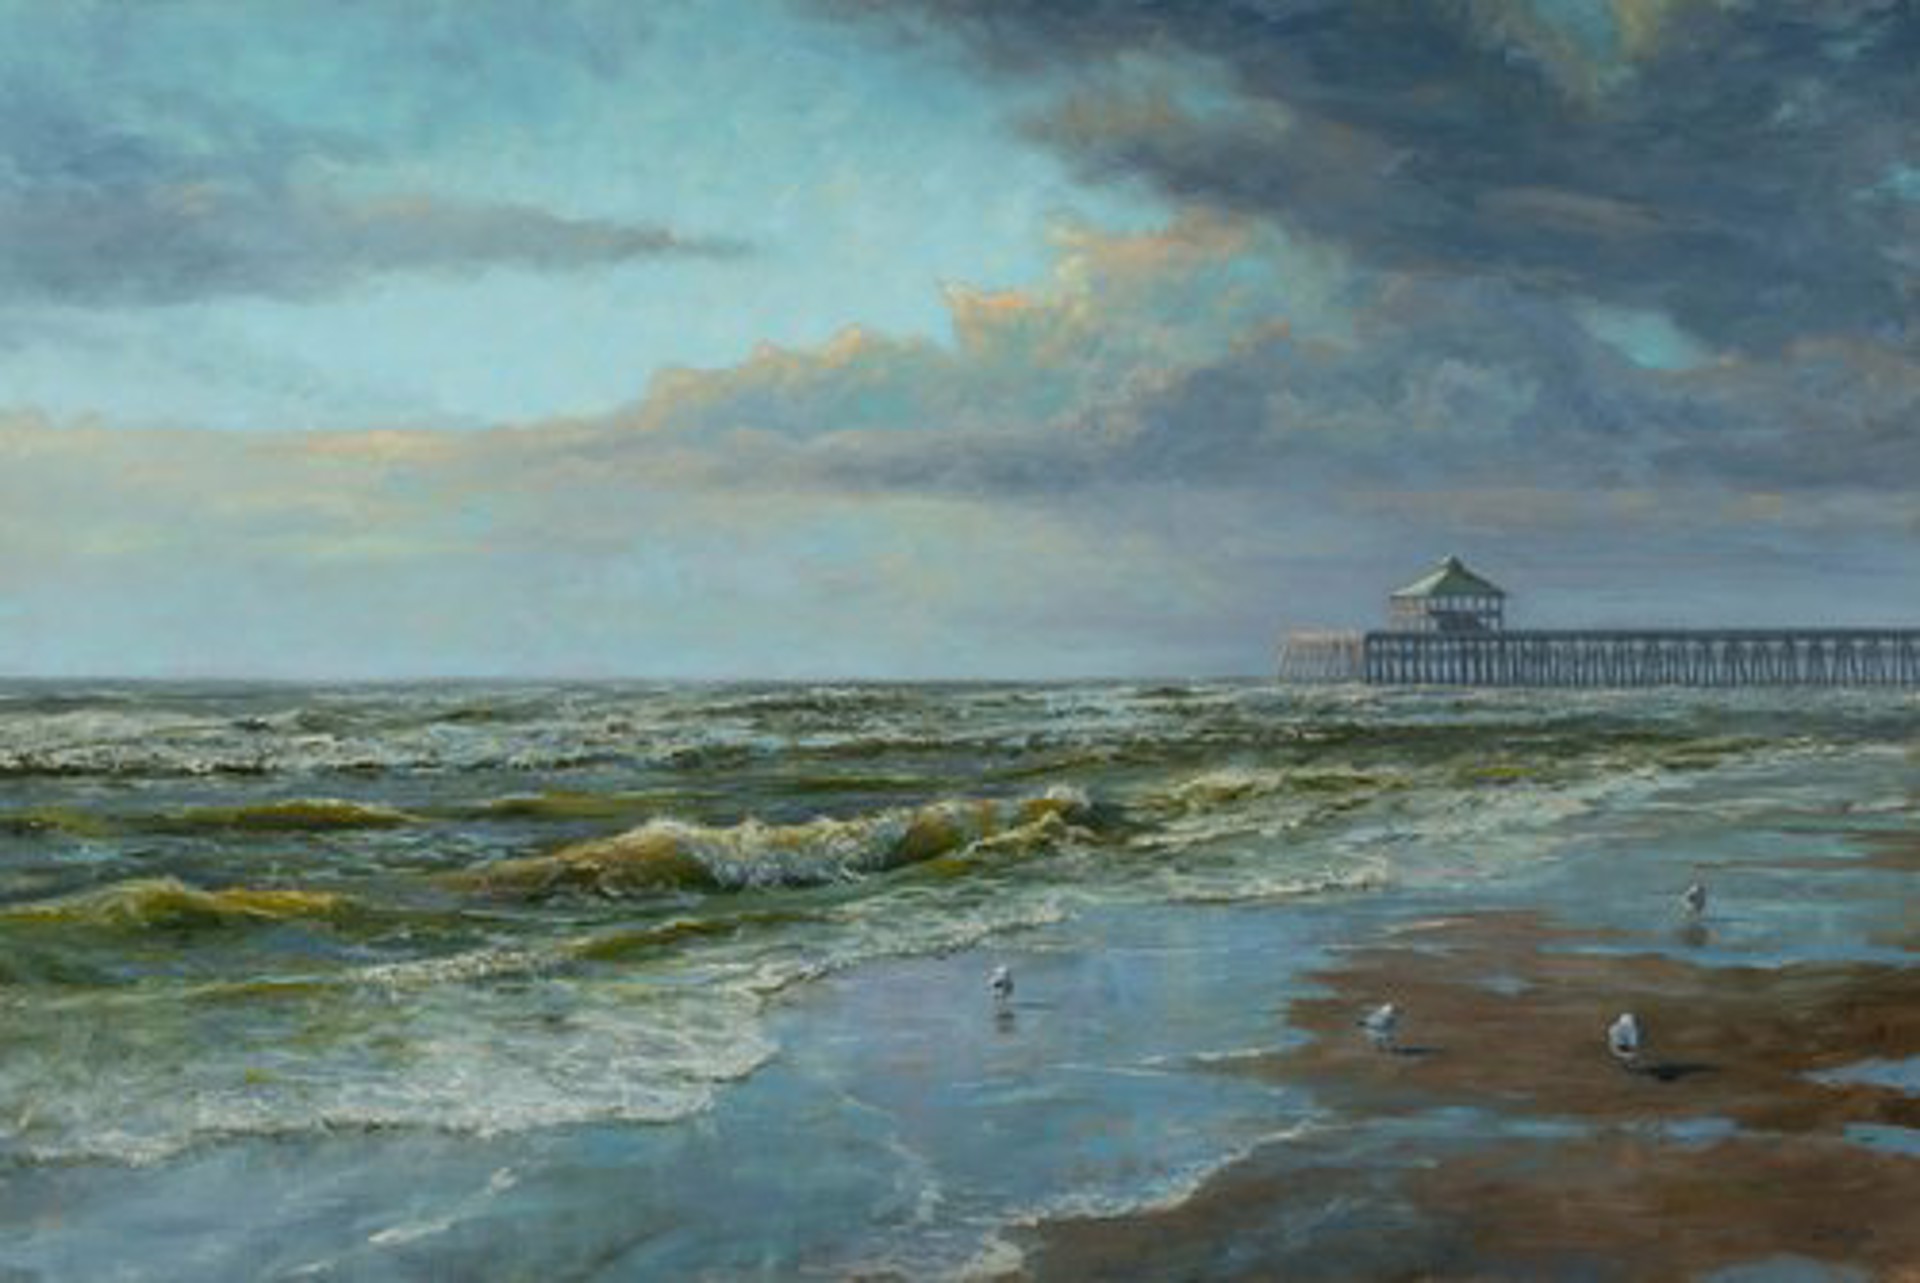 Evening Stroll on Folly by Isaiah Ratterman